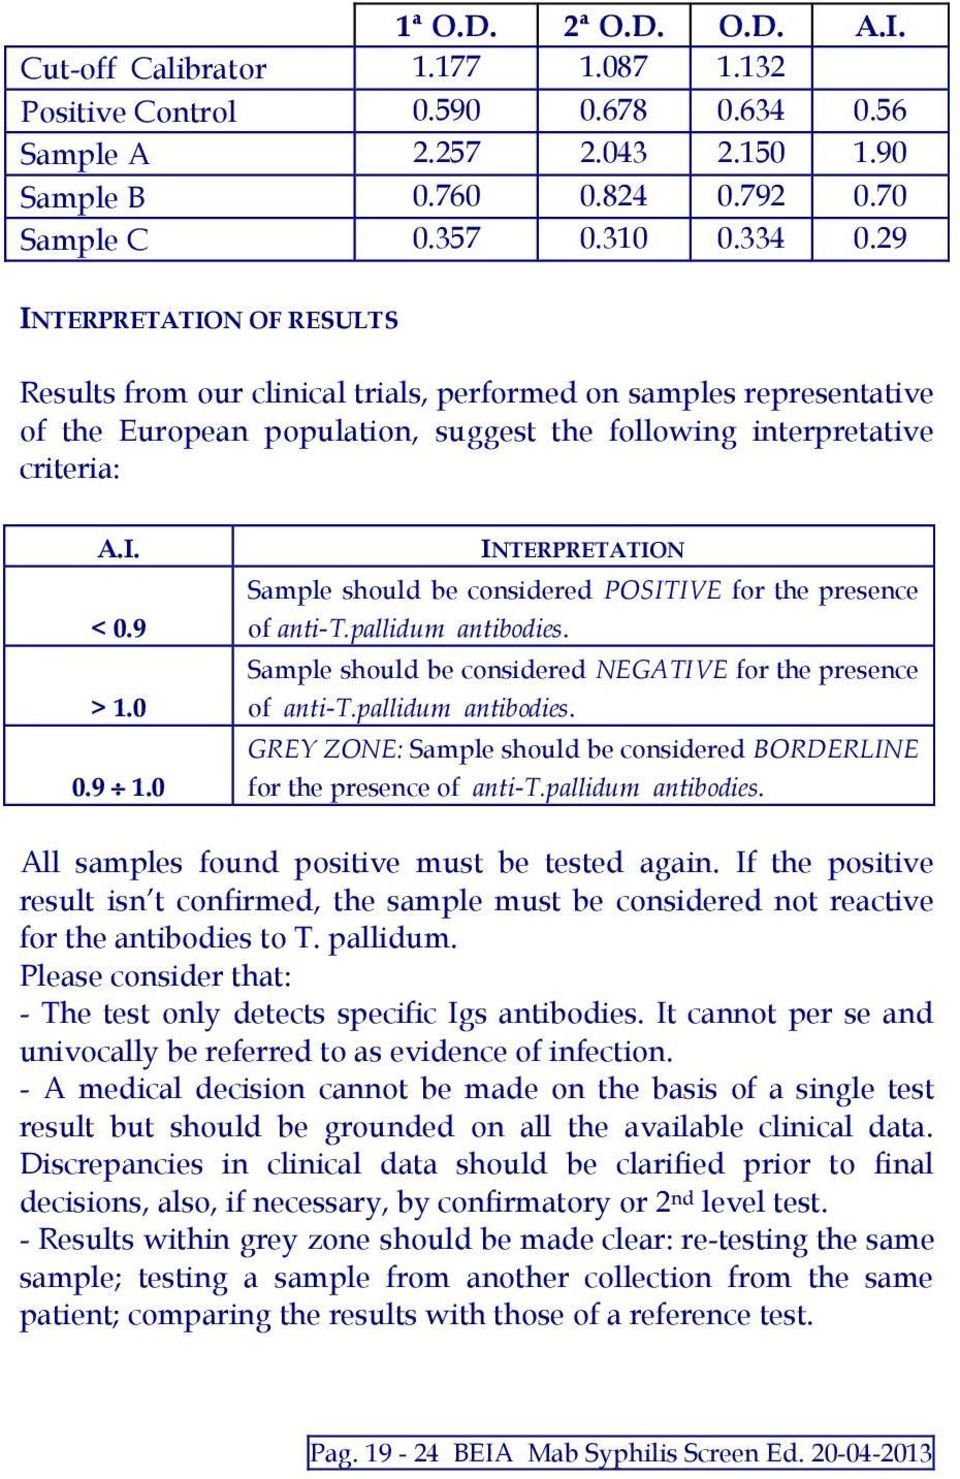 0 INTERPRETATION Sample should be considered POSITIVE for the presence of anti-t.pallidum antibodies. Sample should be considered NEGATIVE for the presence of anti-t.pallidum antibodies. GREY ZONE: Sample should be considered BORDERLINE for the presence of anti-t.